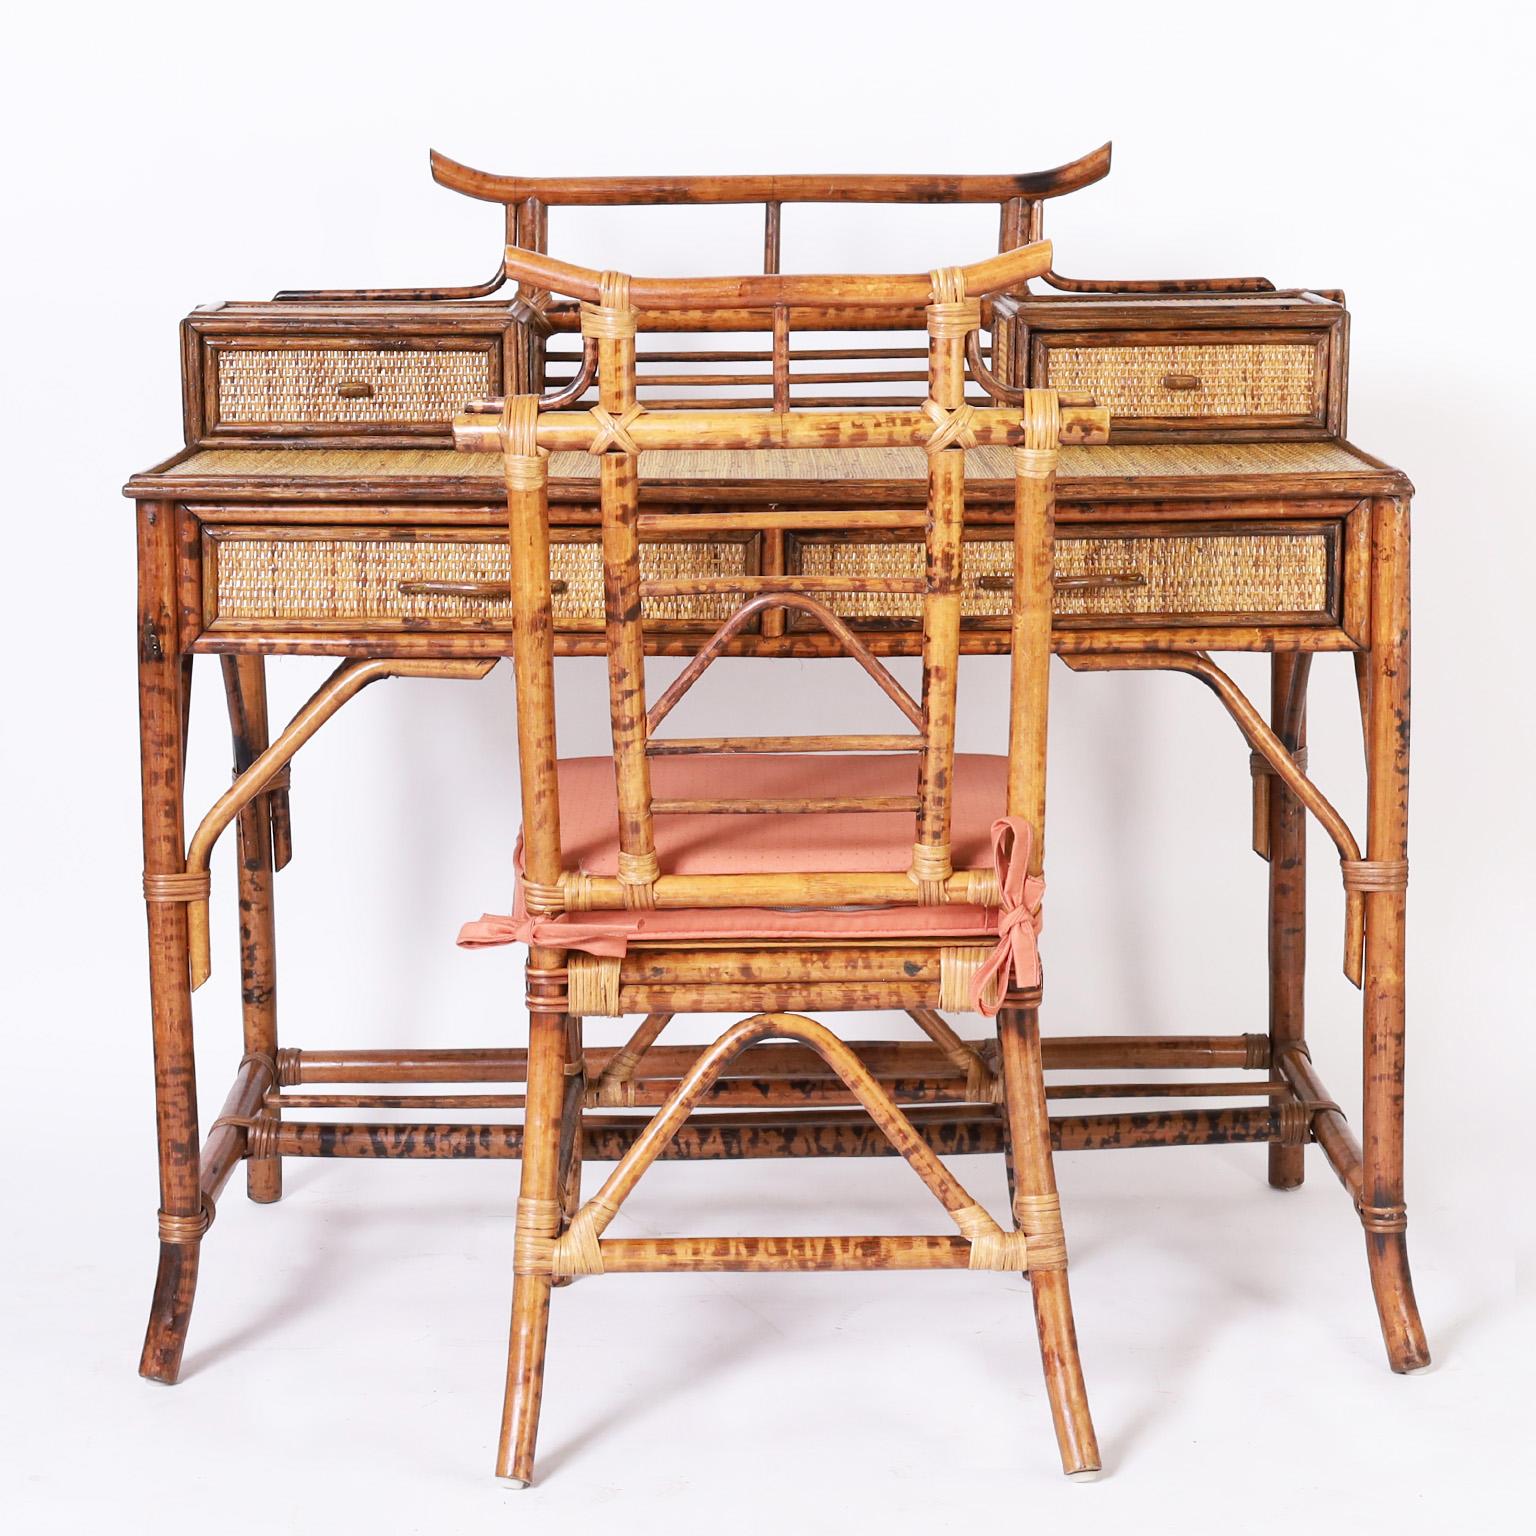 Midcentury British colonial style desk and chair crafted with a burnt bamboo frame having pagoda form galleries. The desk has two glove boxes, grasscloth panels on a case with three drawers, Asian style brackets and splayed feet. 

Chair measures